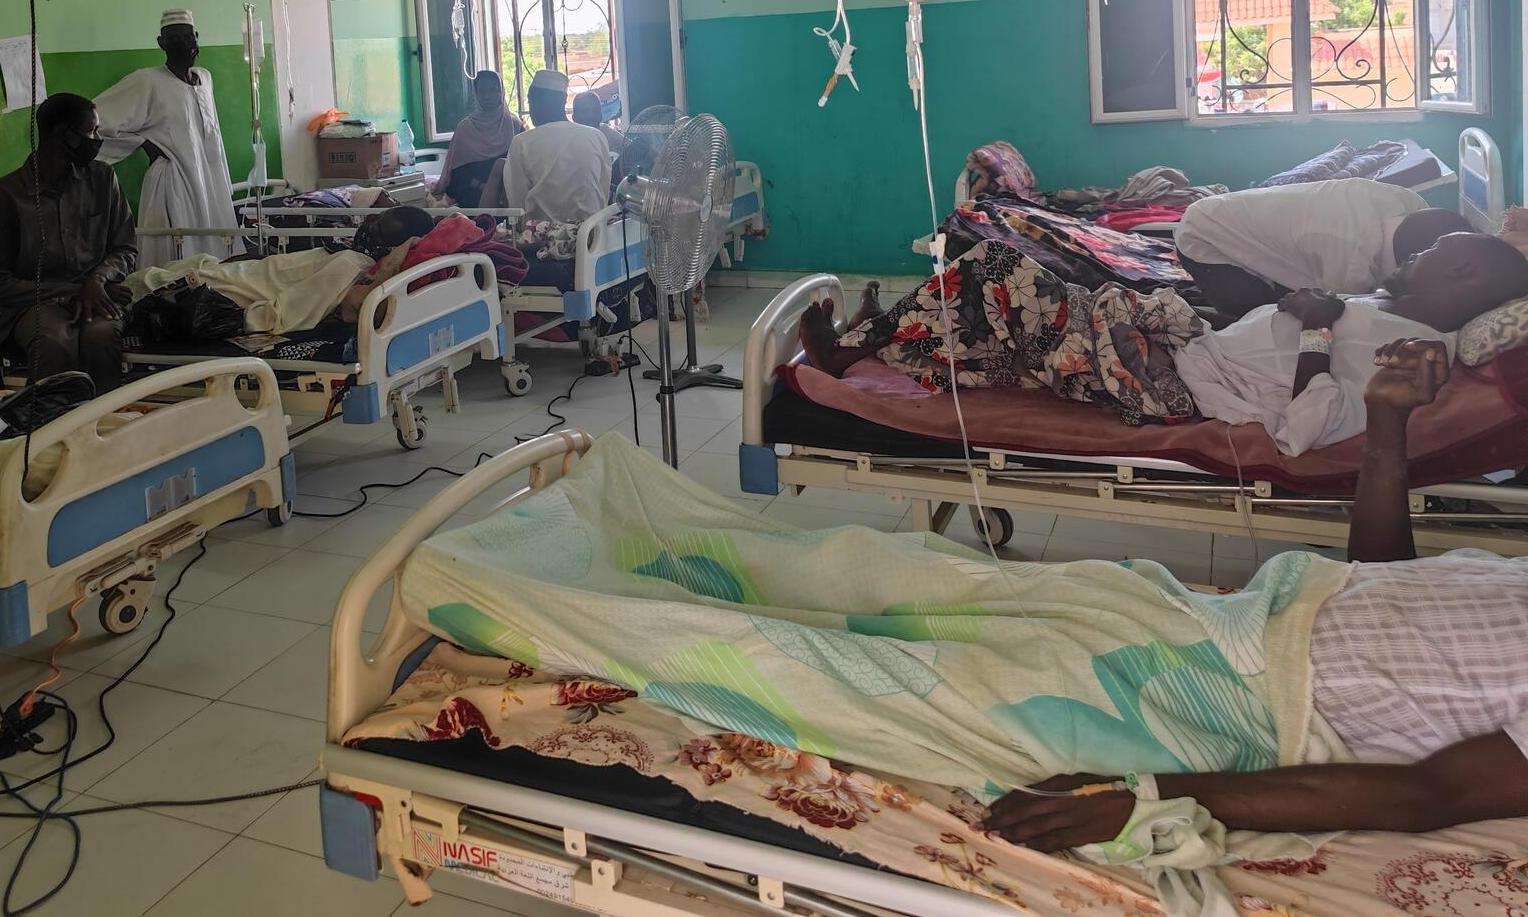 Hospital beds in a crowded room at South Hospital in El Fasher, North Darfur, Sudan.